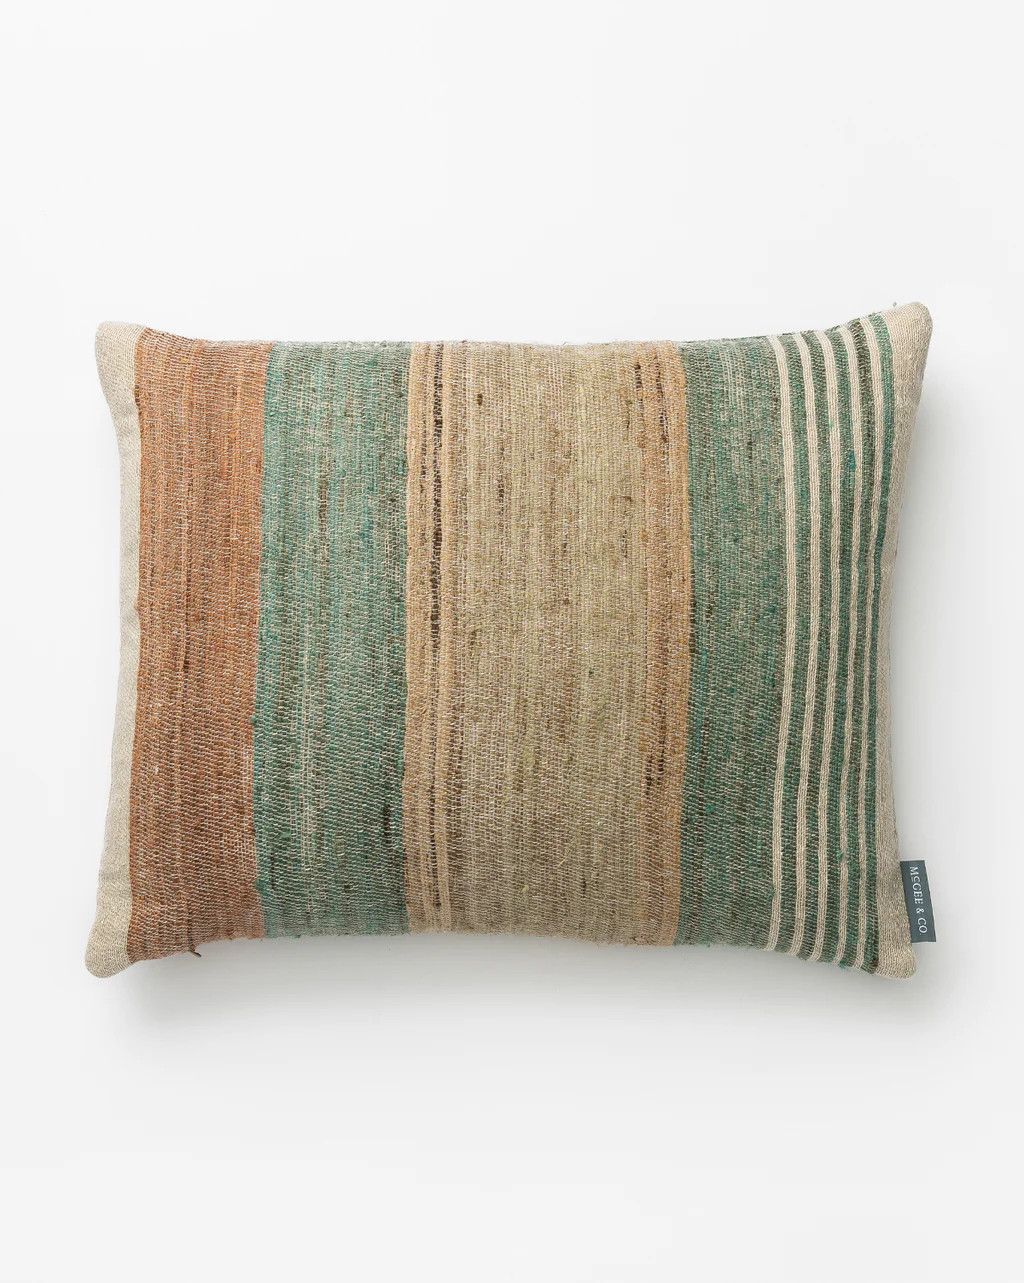 Lorna Woven Pillow Cover | McGee & Co.